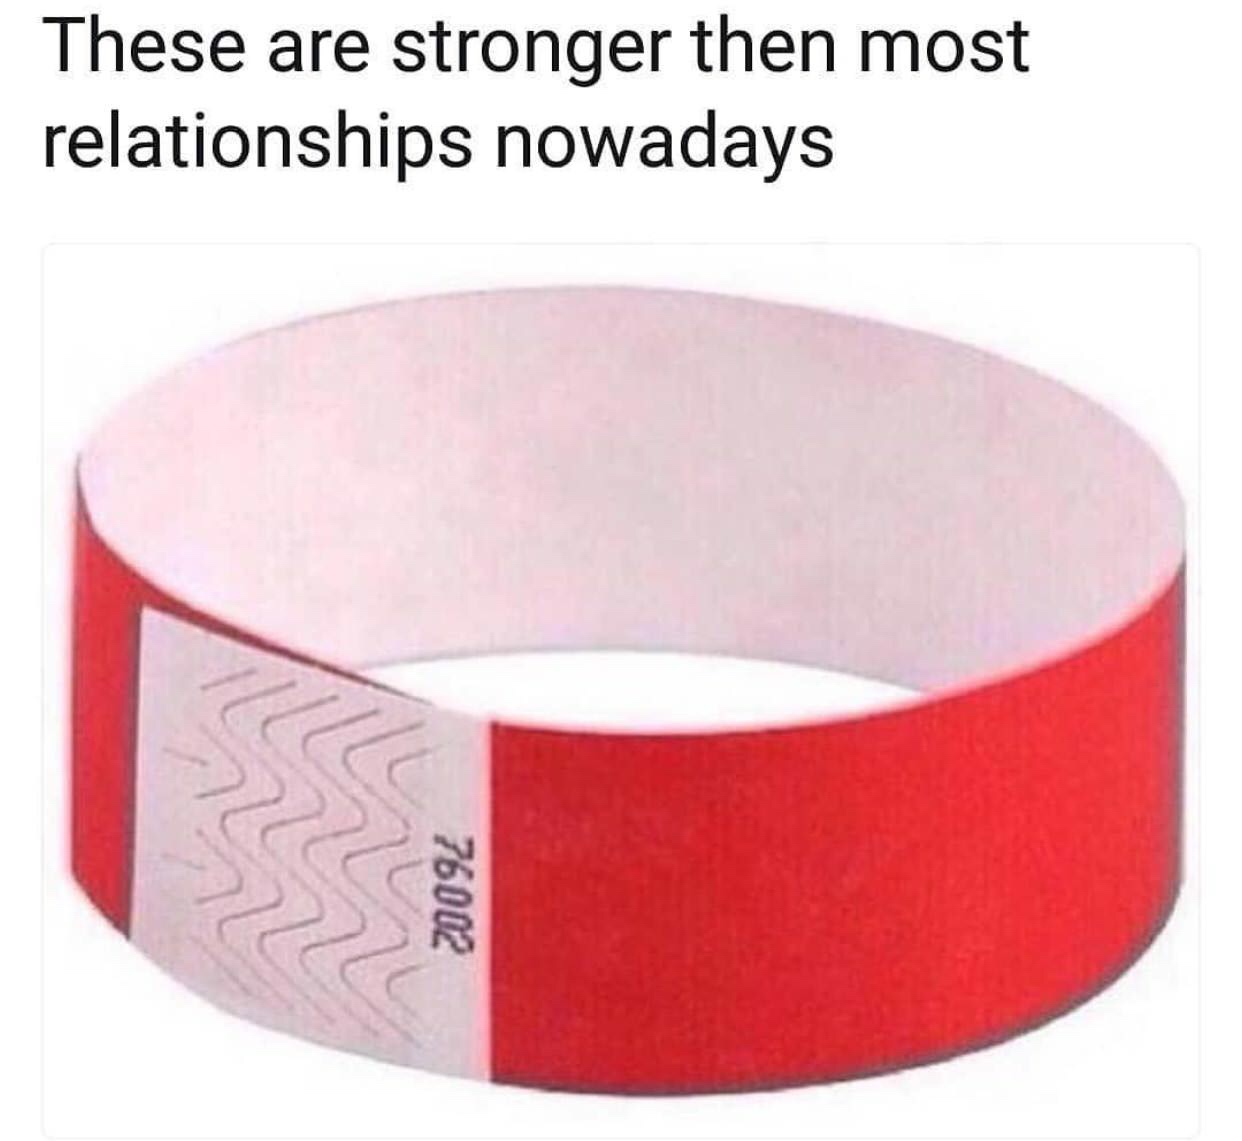 wristband meme - These are stronger then most relationships nowadays 76002